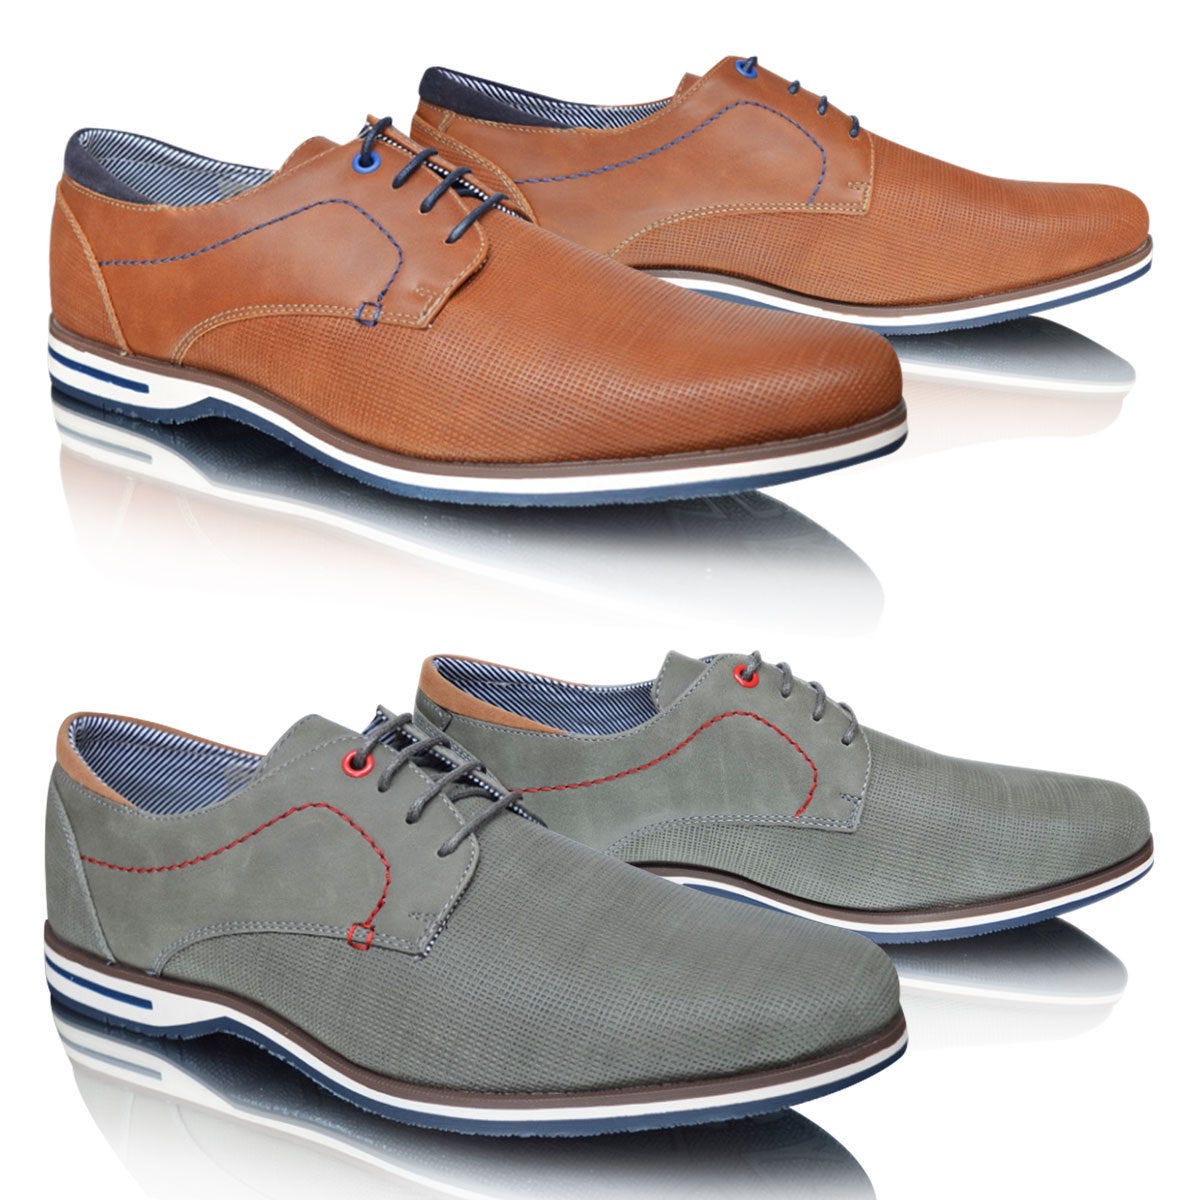 men's casual office shoes